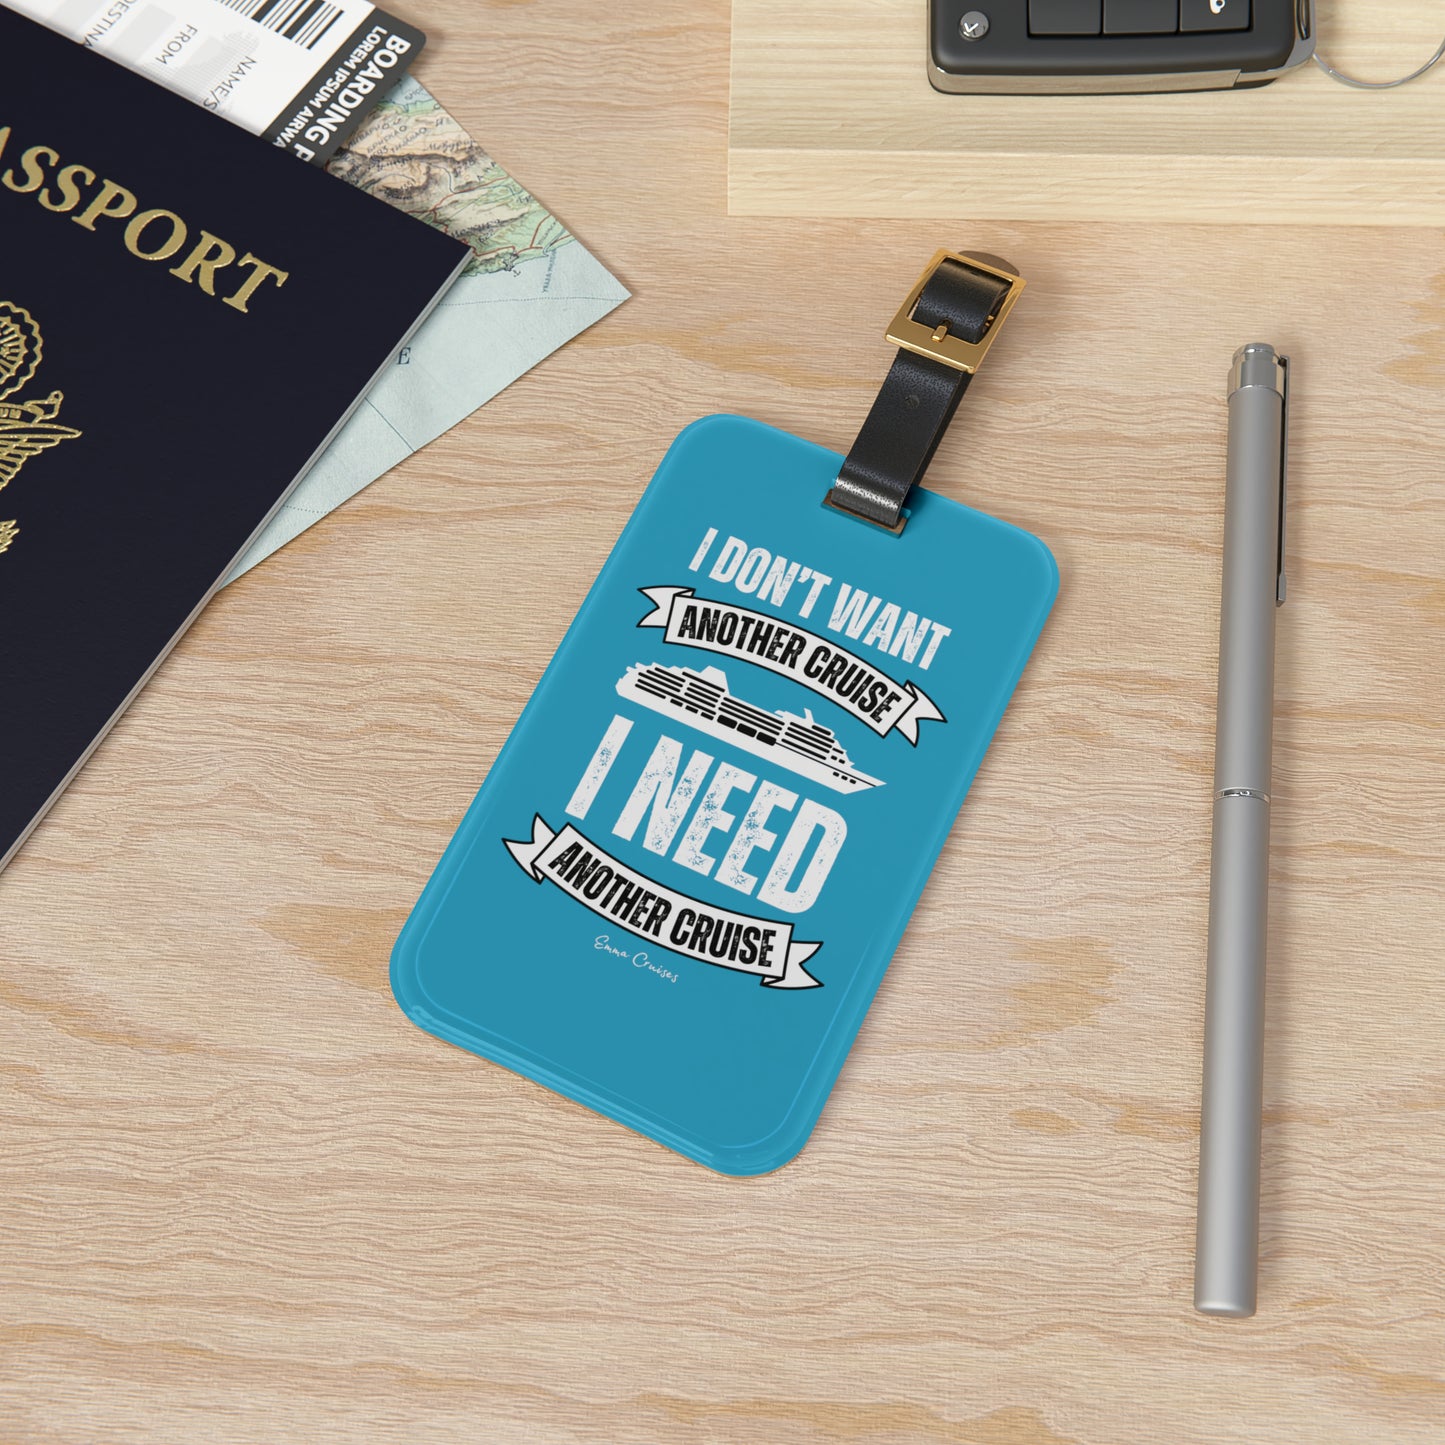 I Don't Want Another Cruise - Luggage Tag